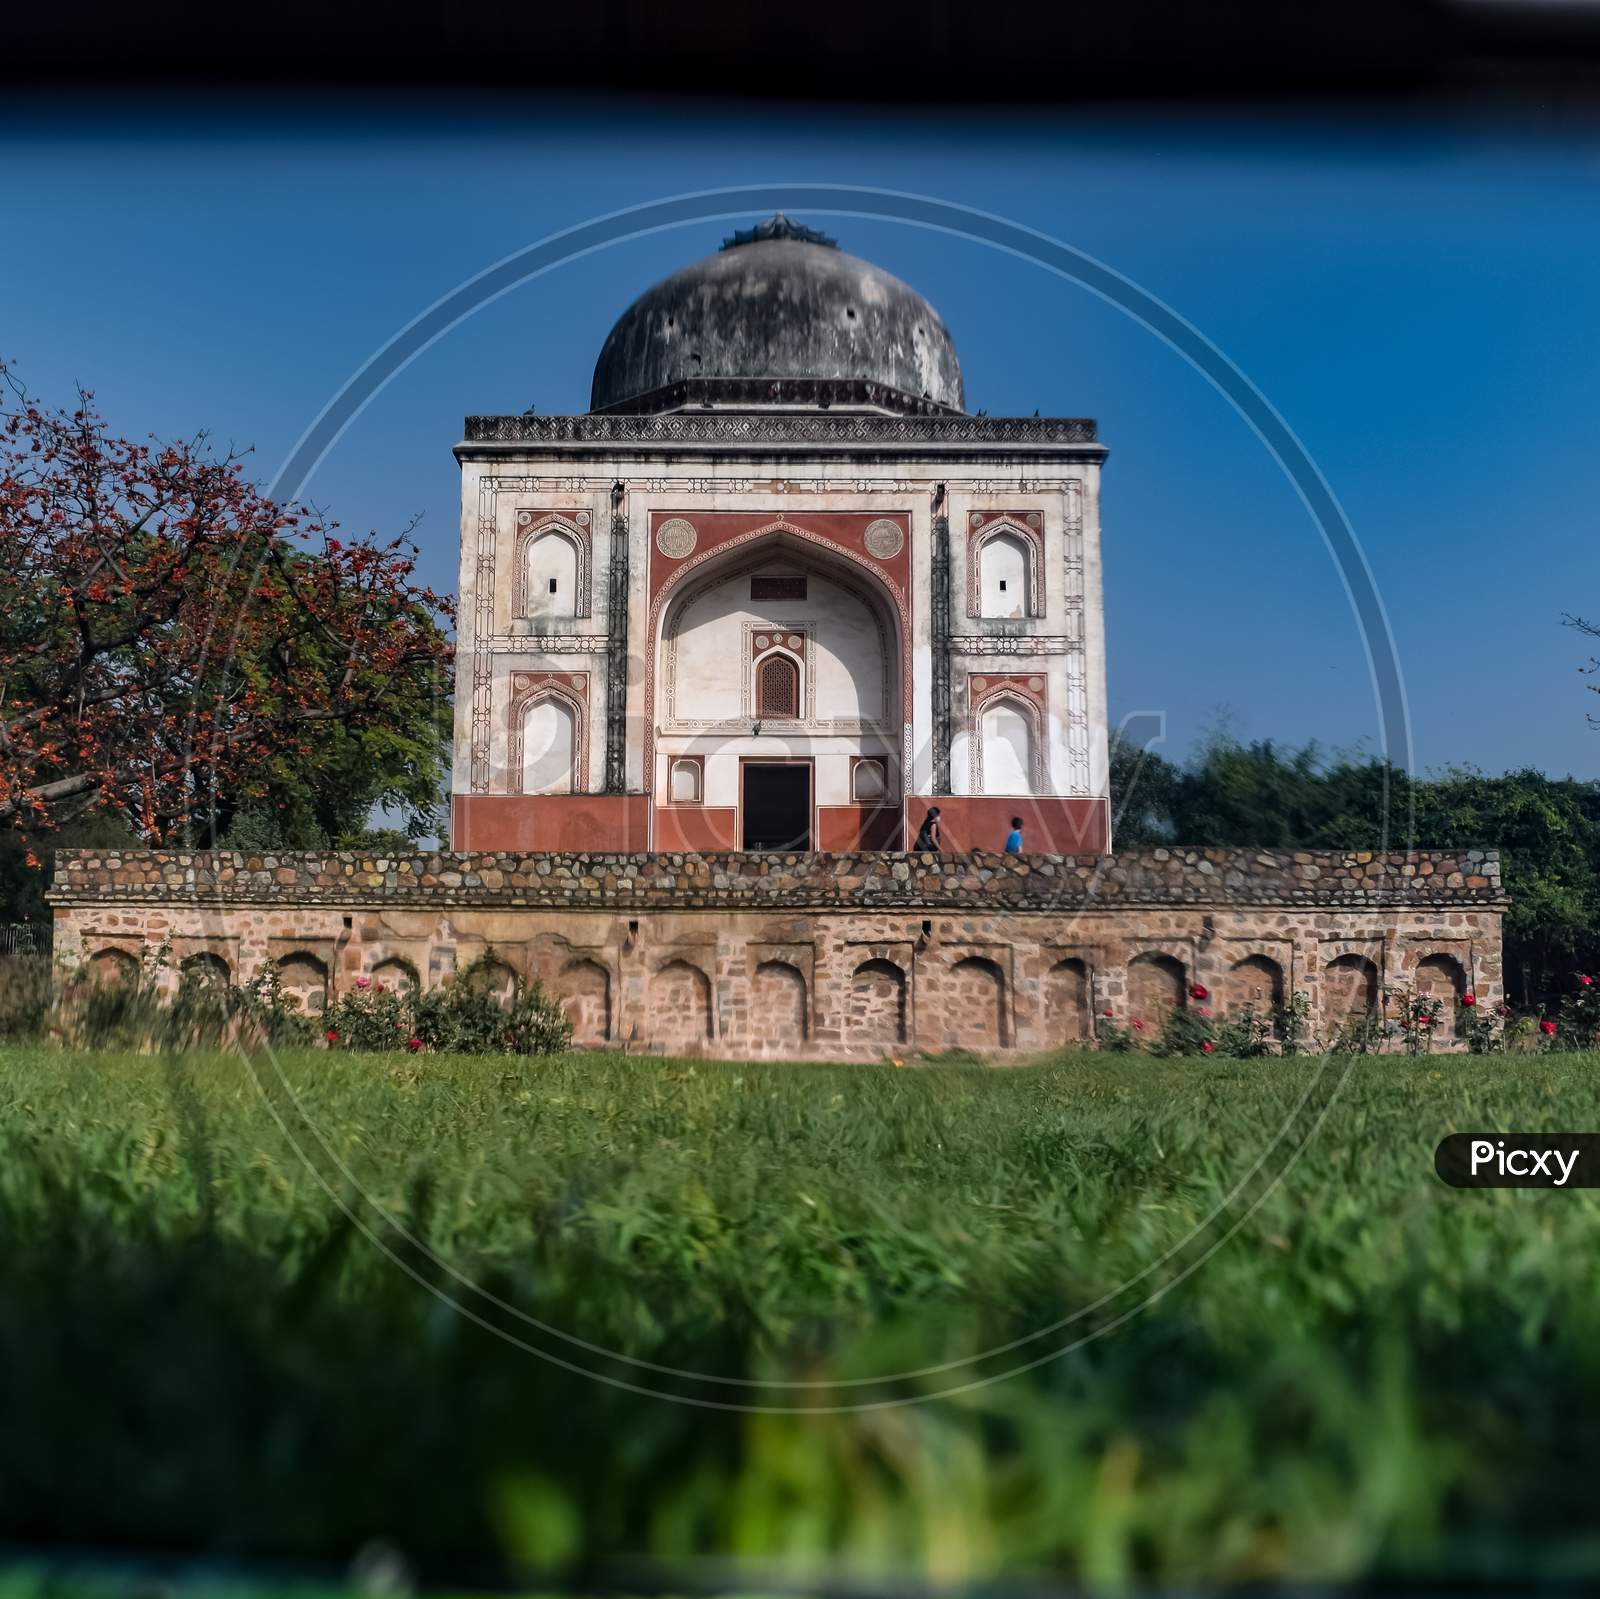 Inside View Of Architecture Tomb Inside Sunder Nursery In Delhi India, Sunder Nursery Is World Heritage Site Located Near Humayun'S Tomb In Delhi, Sunder Nursery Inside View During Morning Time